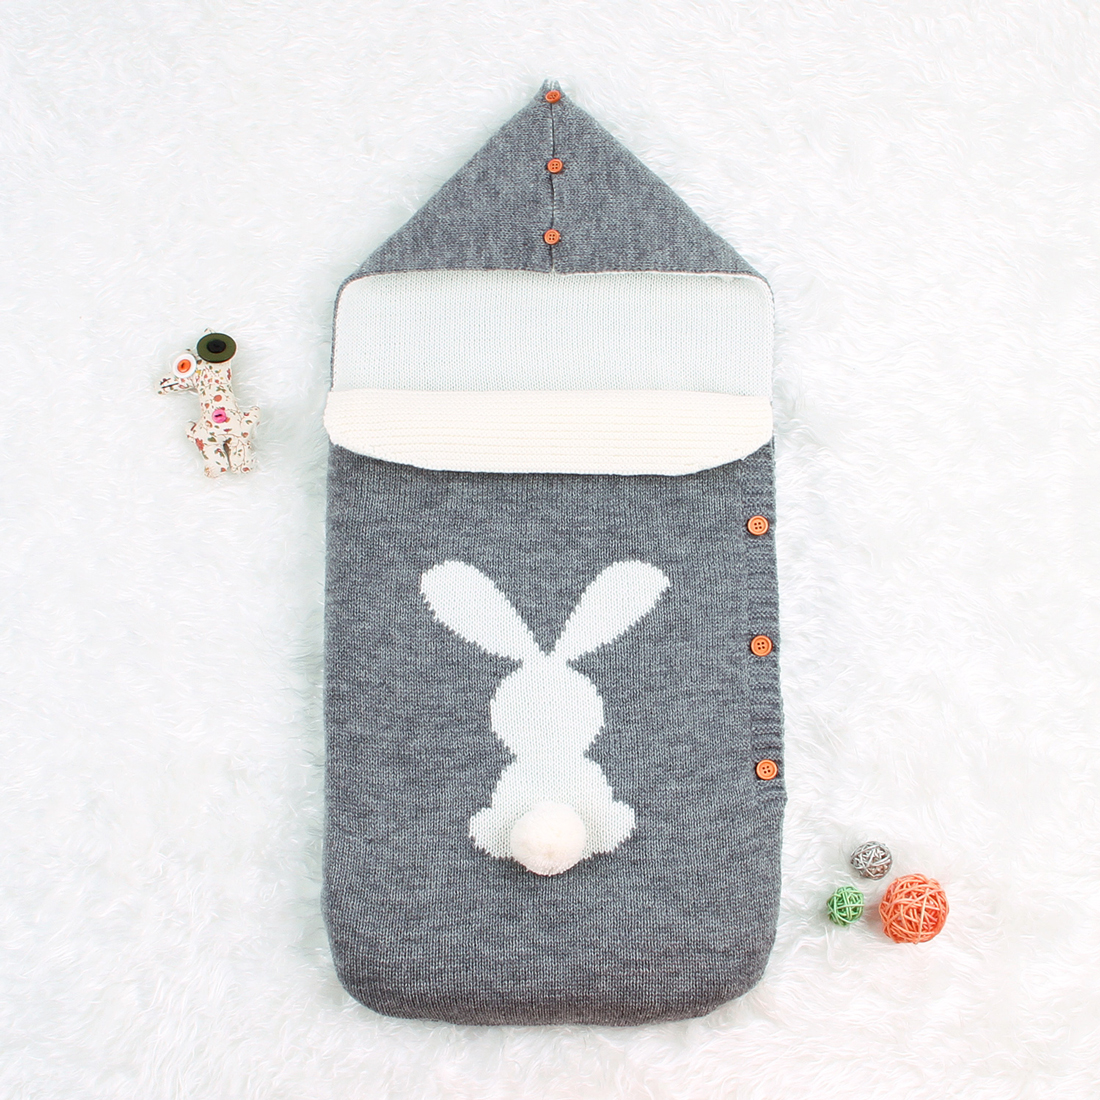 Comfy Rabbit Knitted Hooded Sleeping Bag